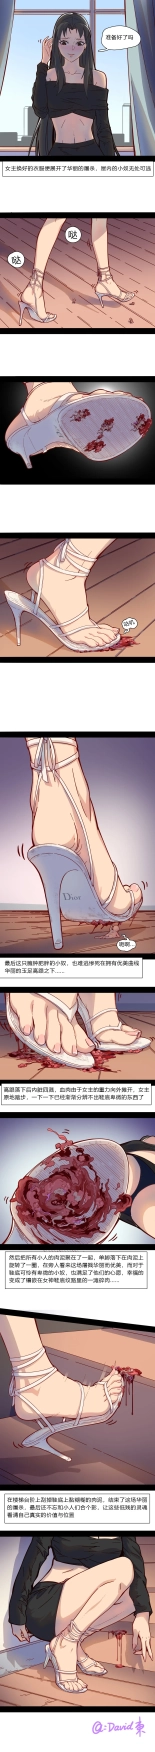 - High Heel Massacre in Morning : page 5